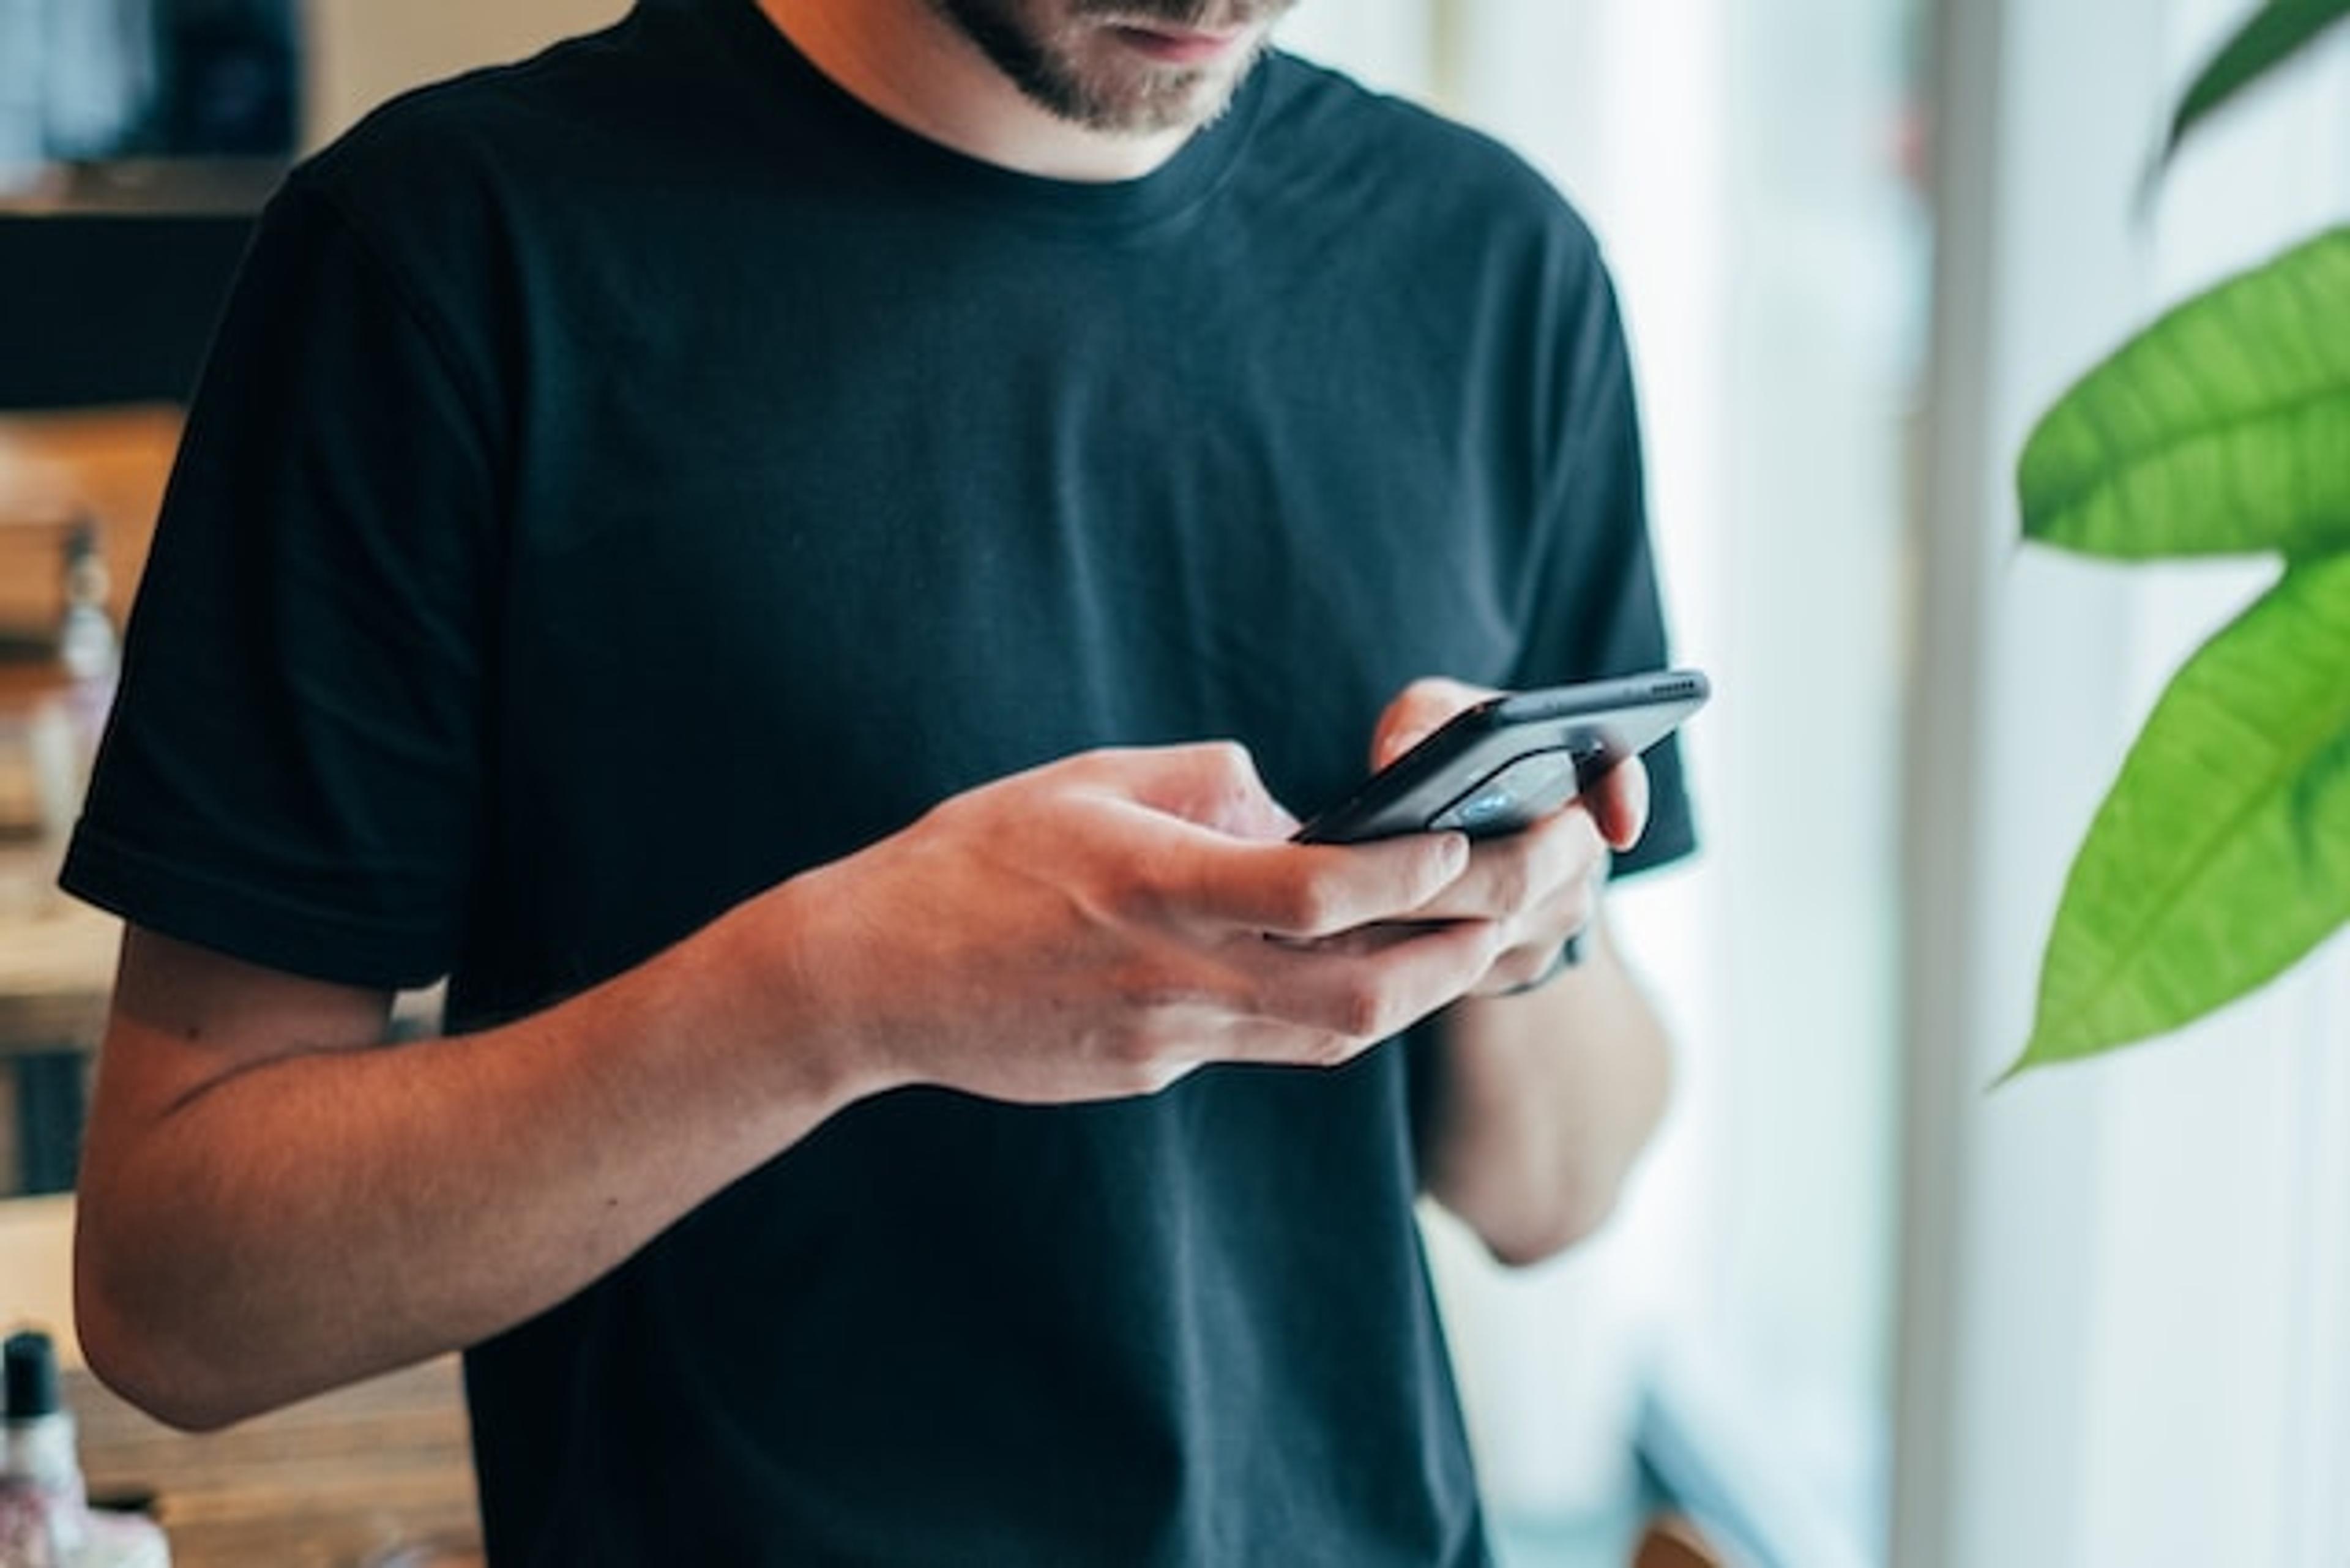 A man wearing a black shirt focused on his phone screen, is sexting cheating